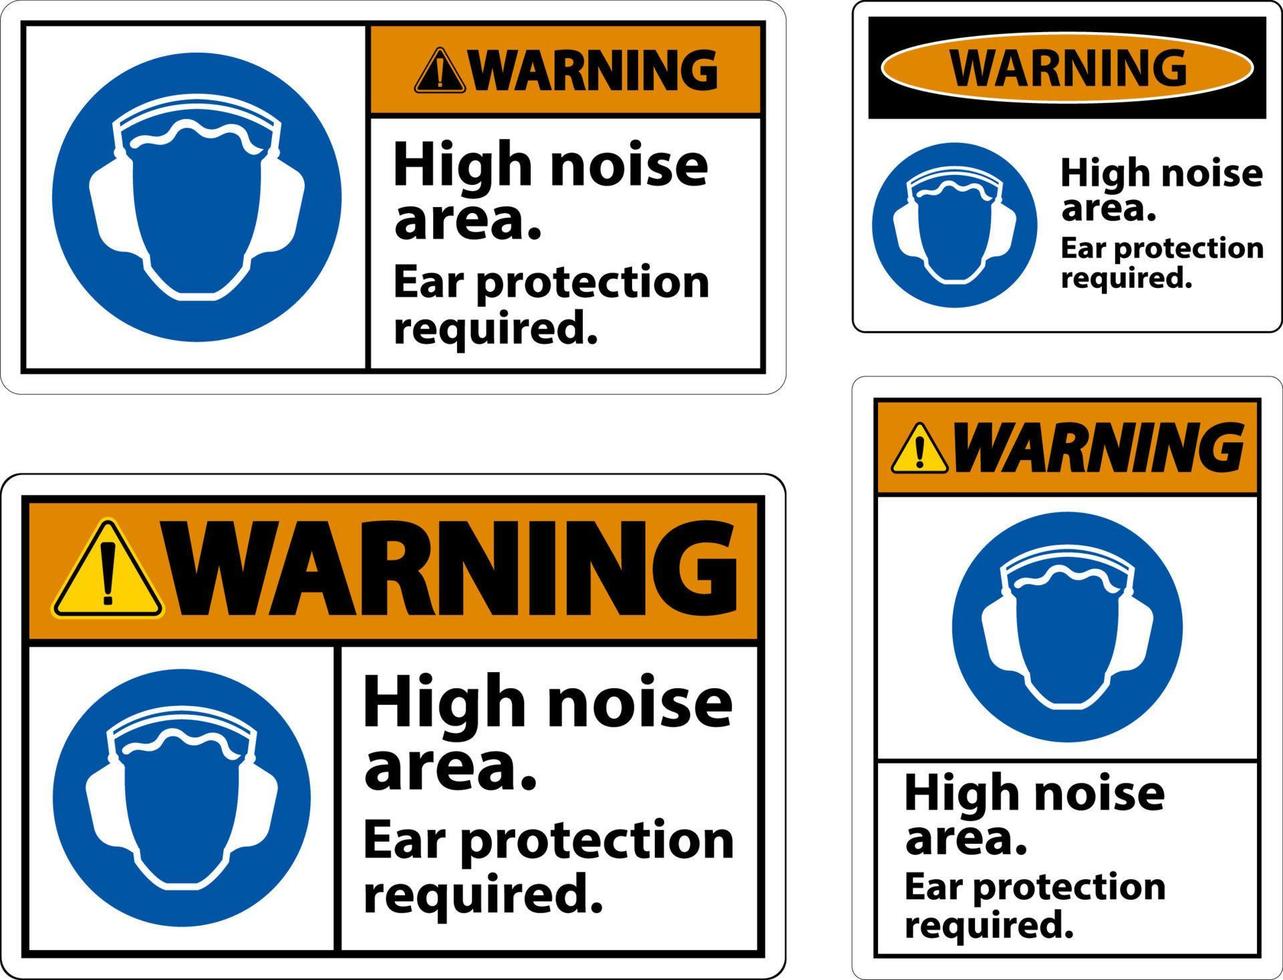 Warning Ear Protection Required Sign On White Background vector